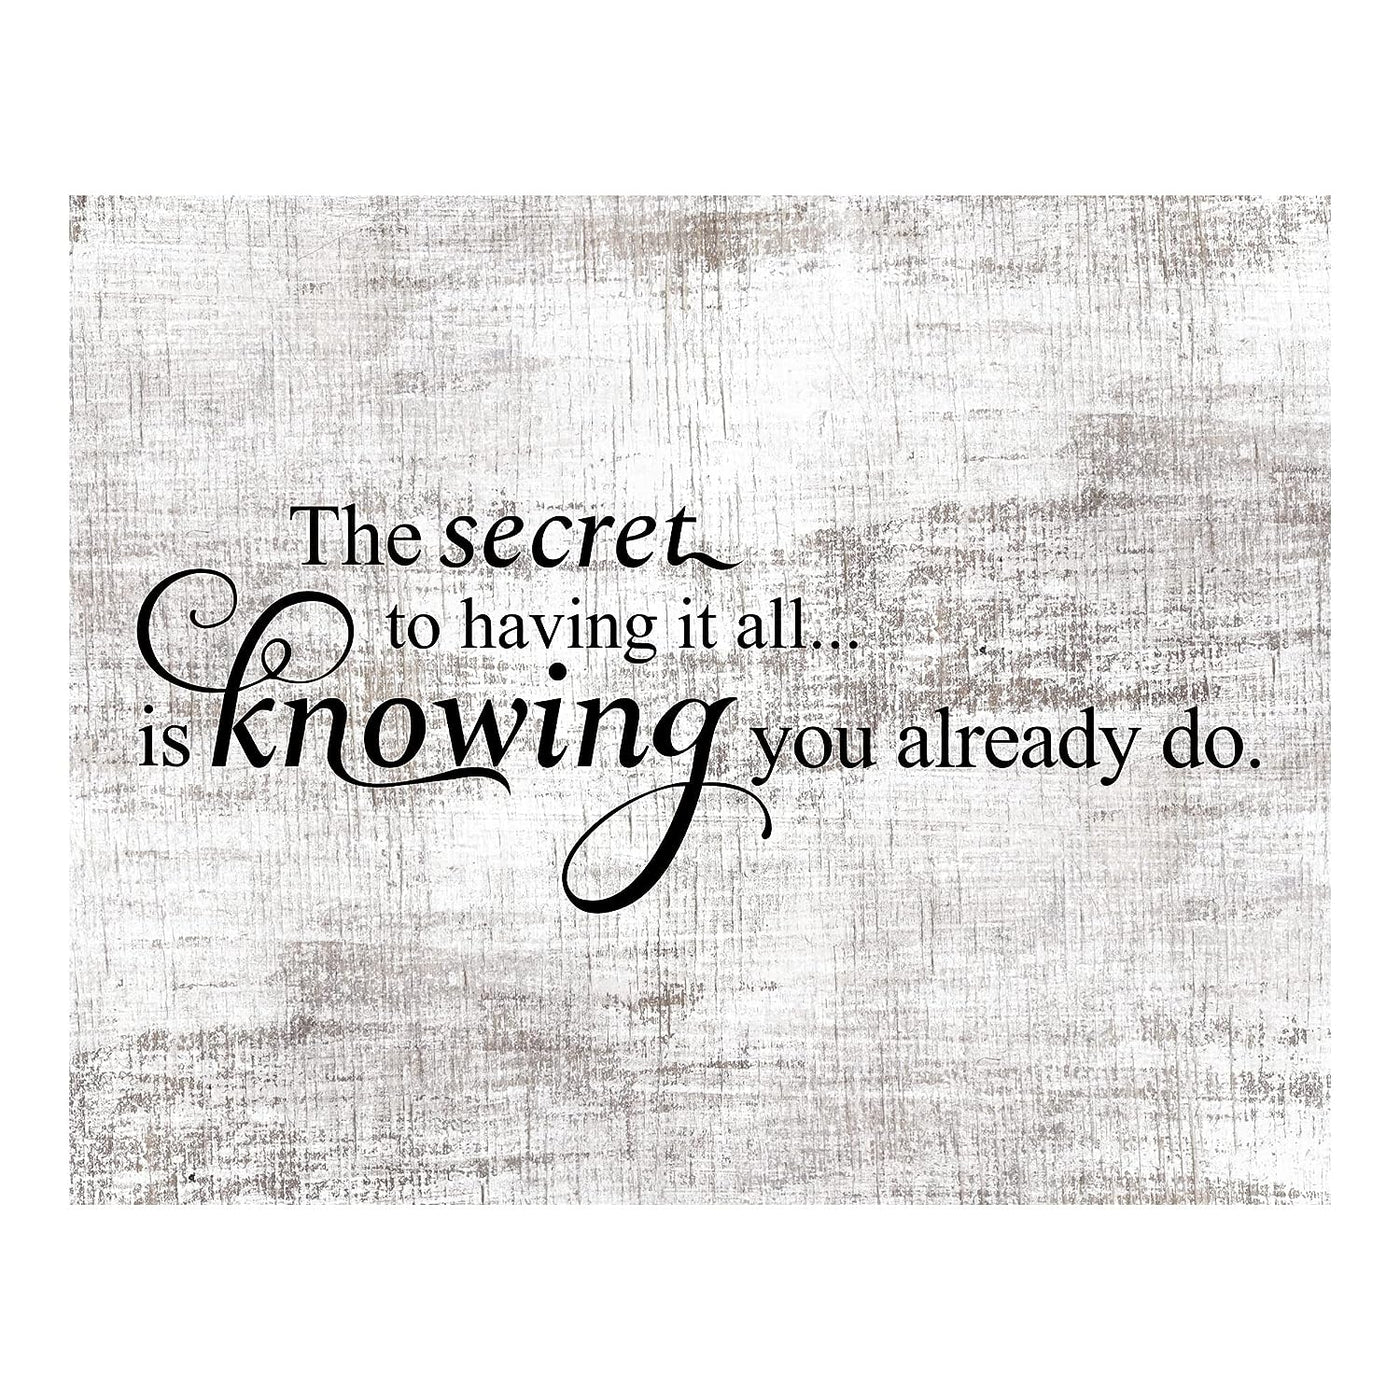 Secret to Having It All Is Knowing You Already Do Motivational Quotes Wall Sign -10 x 8" Rustic Inspirational Art Print -Ready to Frame. Home-Office-School-Dorm Decor. Printed on Photo Paper.